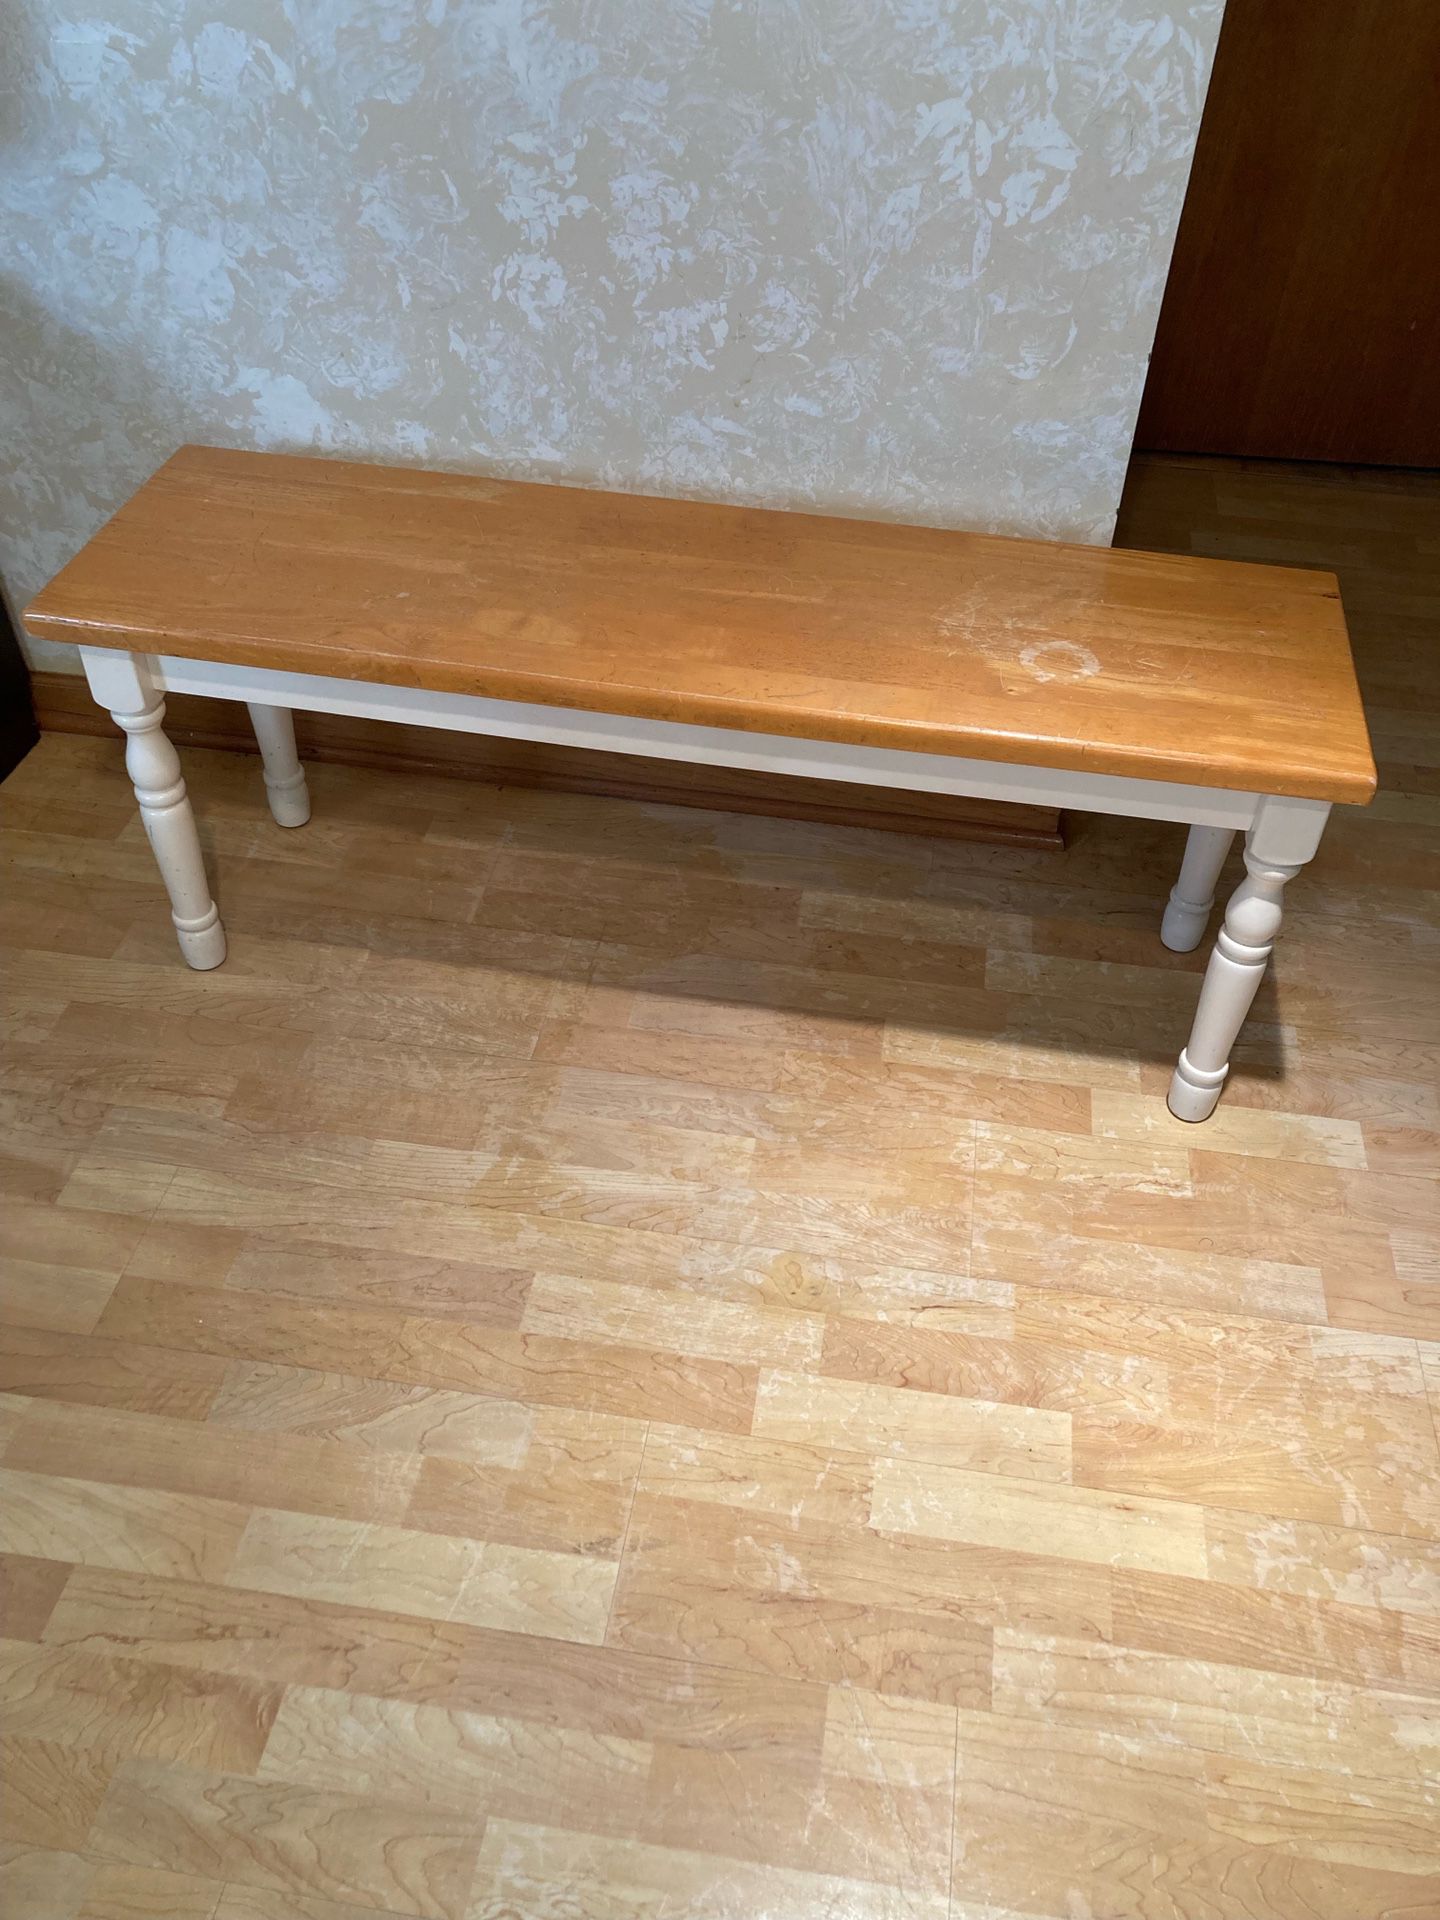 Solid Wood Bench, See all pictures posted/ Pickup in Lake Zurich 